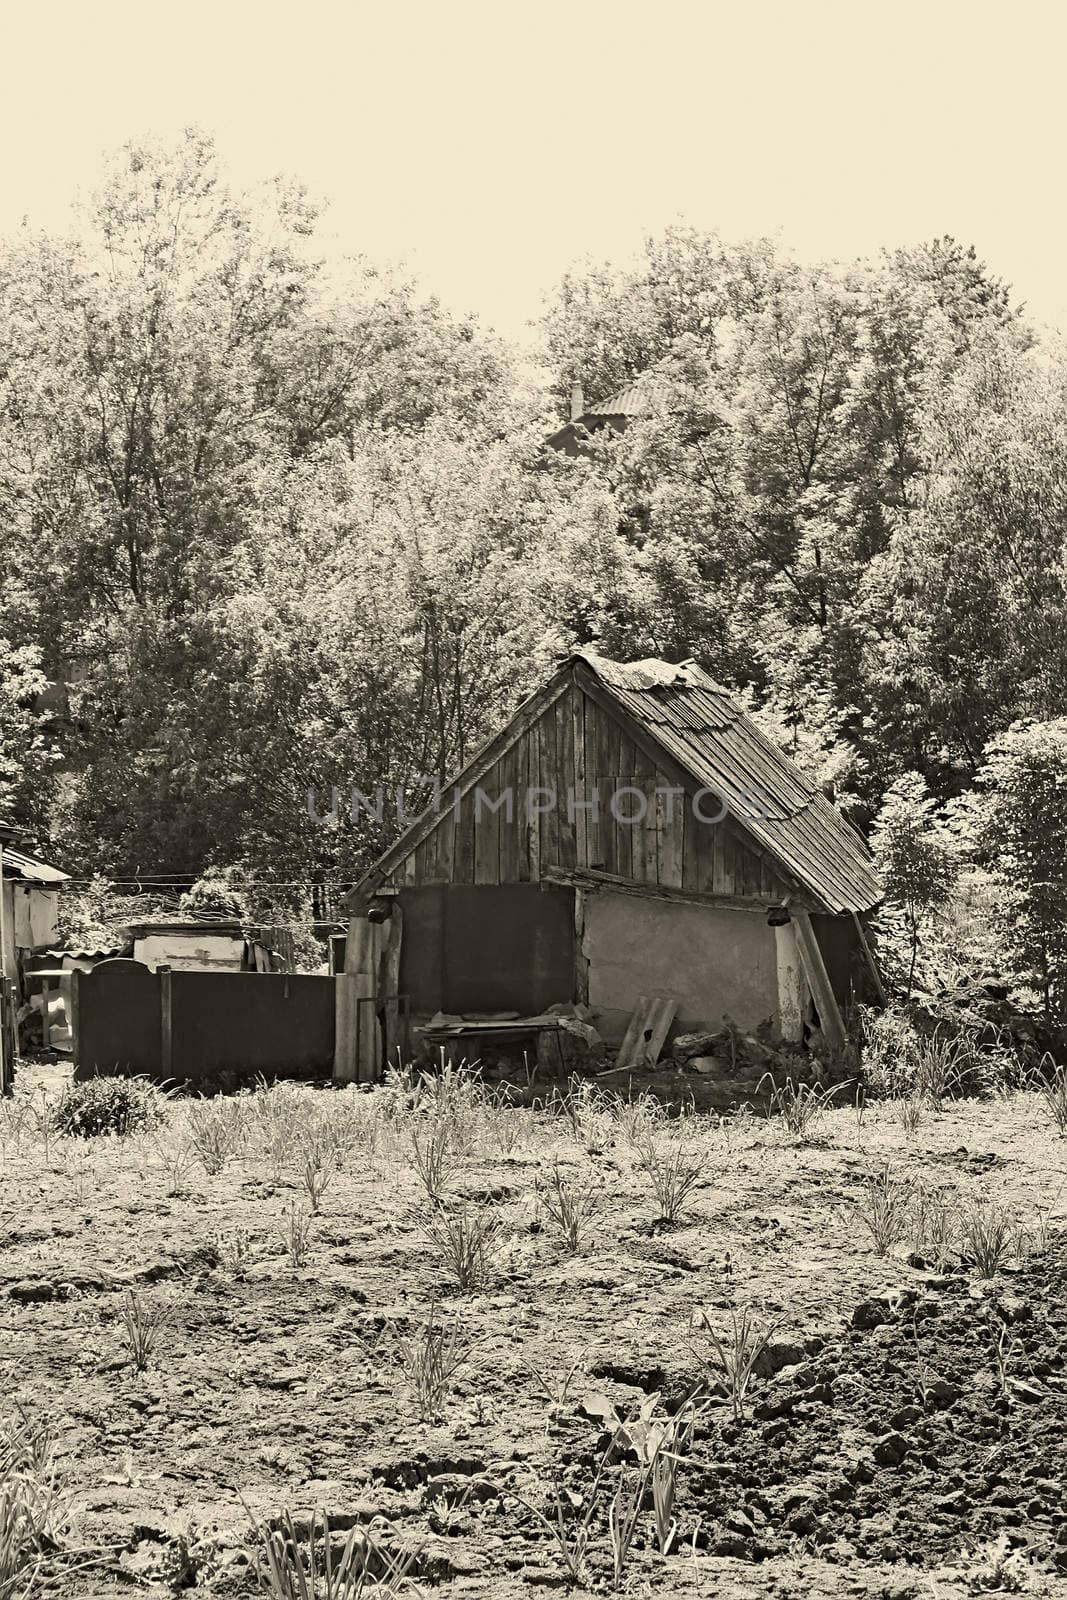 Old abandoned barn amongst trees. Stylized as an old black and white photograph